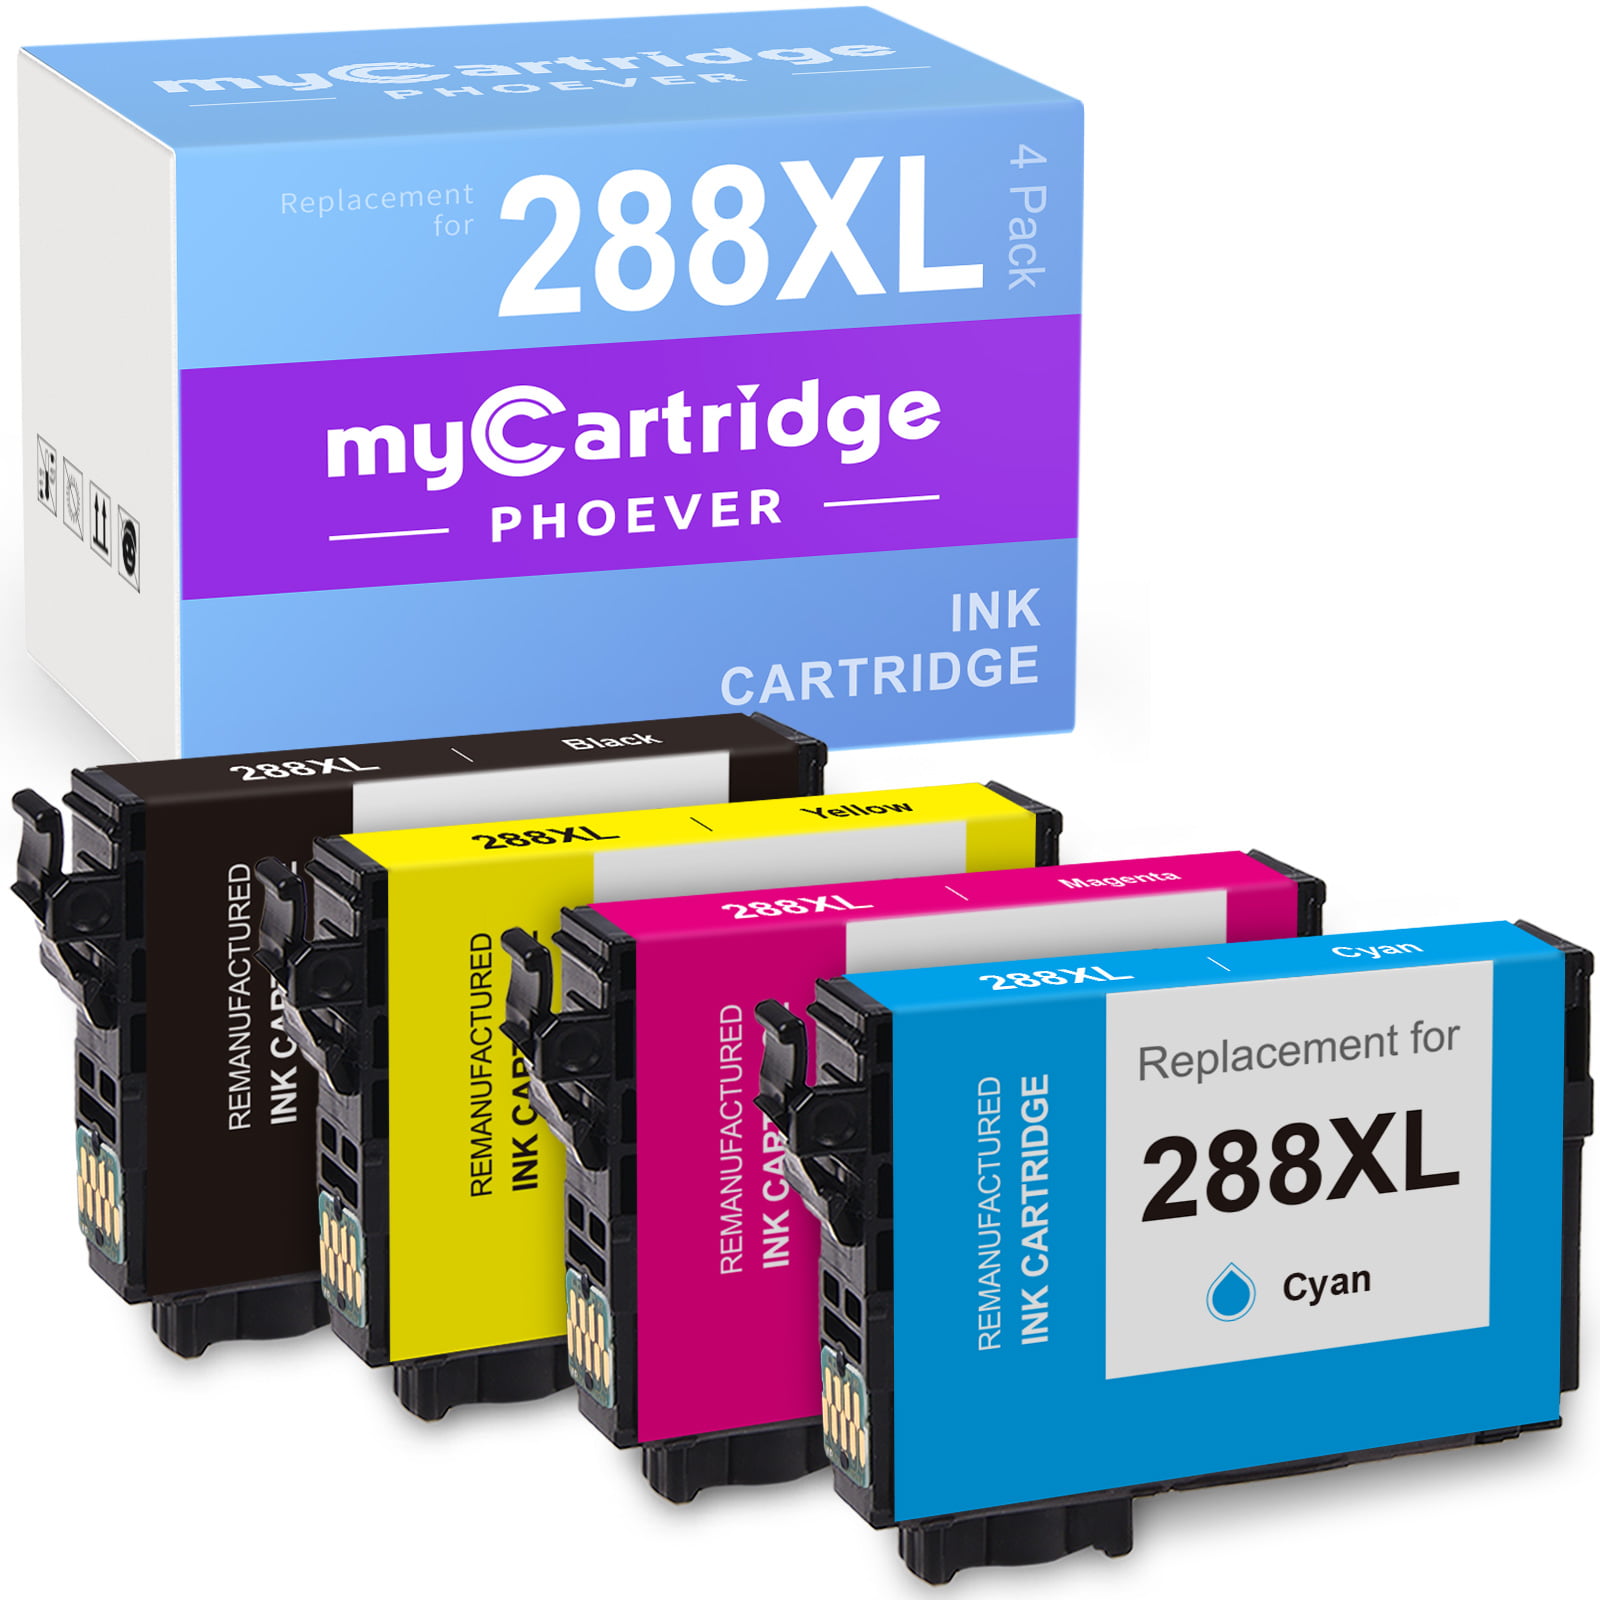 Black, 1-Pack LD Products Remanufactured Ink Cartridge Replacements for T288XL120 Epson 288xl Ink Cartridges High Yield for use in Epson XP446 Expression XP 440 XP330 XP340 XP430 XP434 XP446 XP-330 